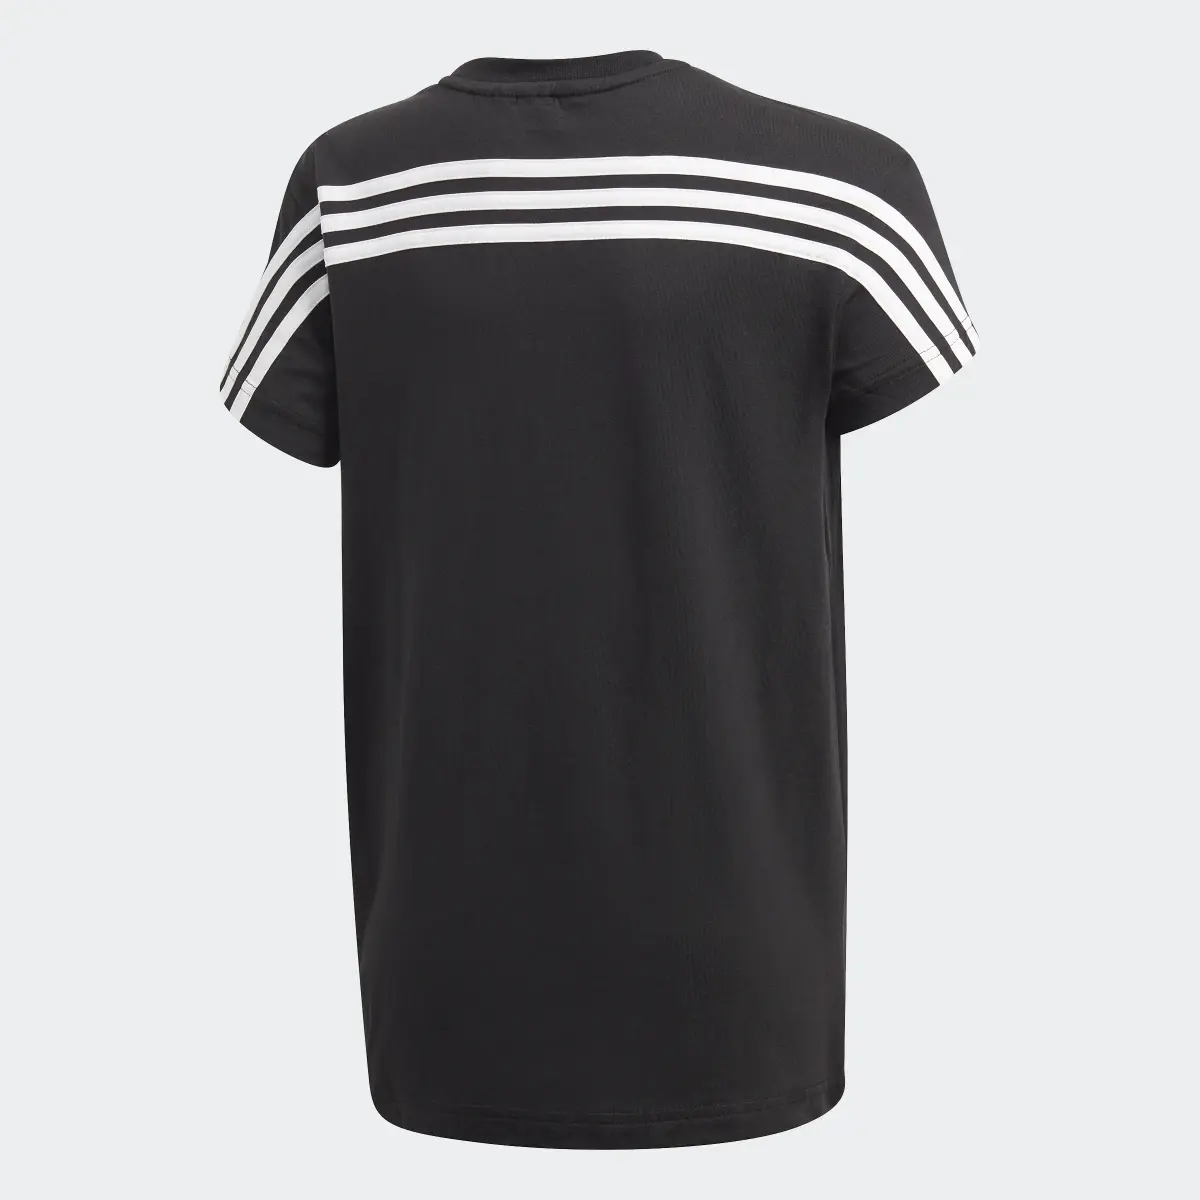 Adidas Must Haves 3-Stripes Tee. 2